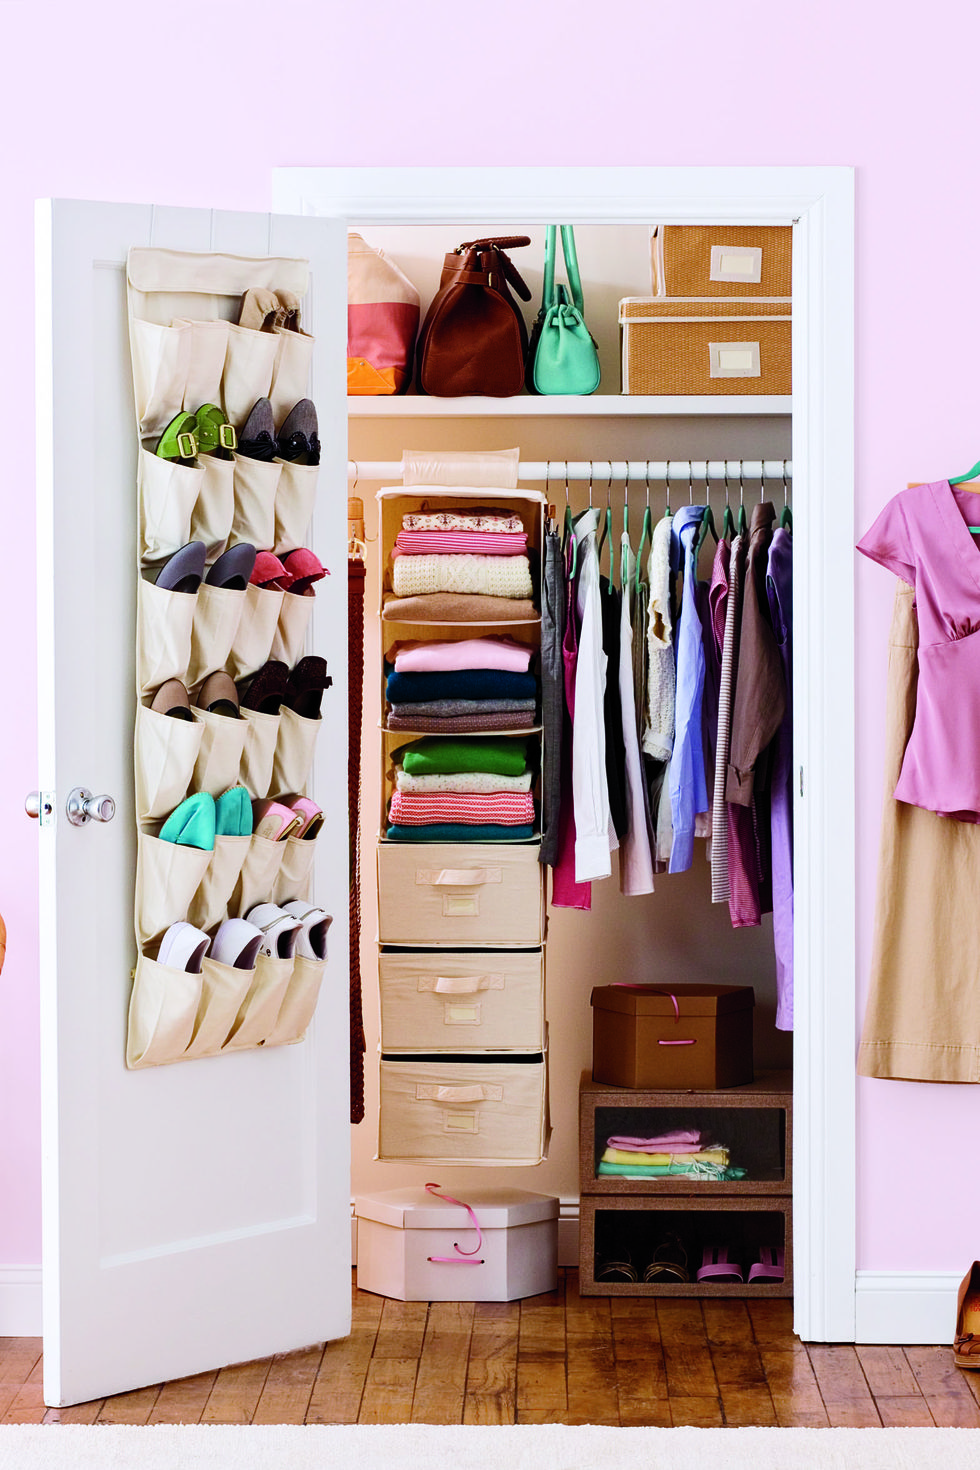 Ideas for organizing closets, organizers for hanging shoes over the door, clothes in the closet